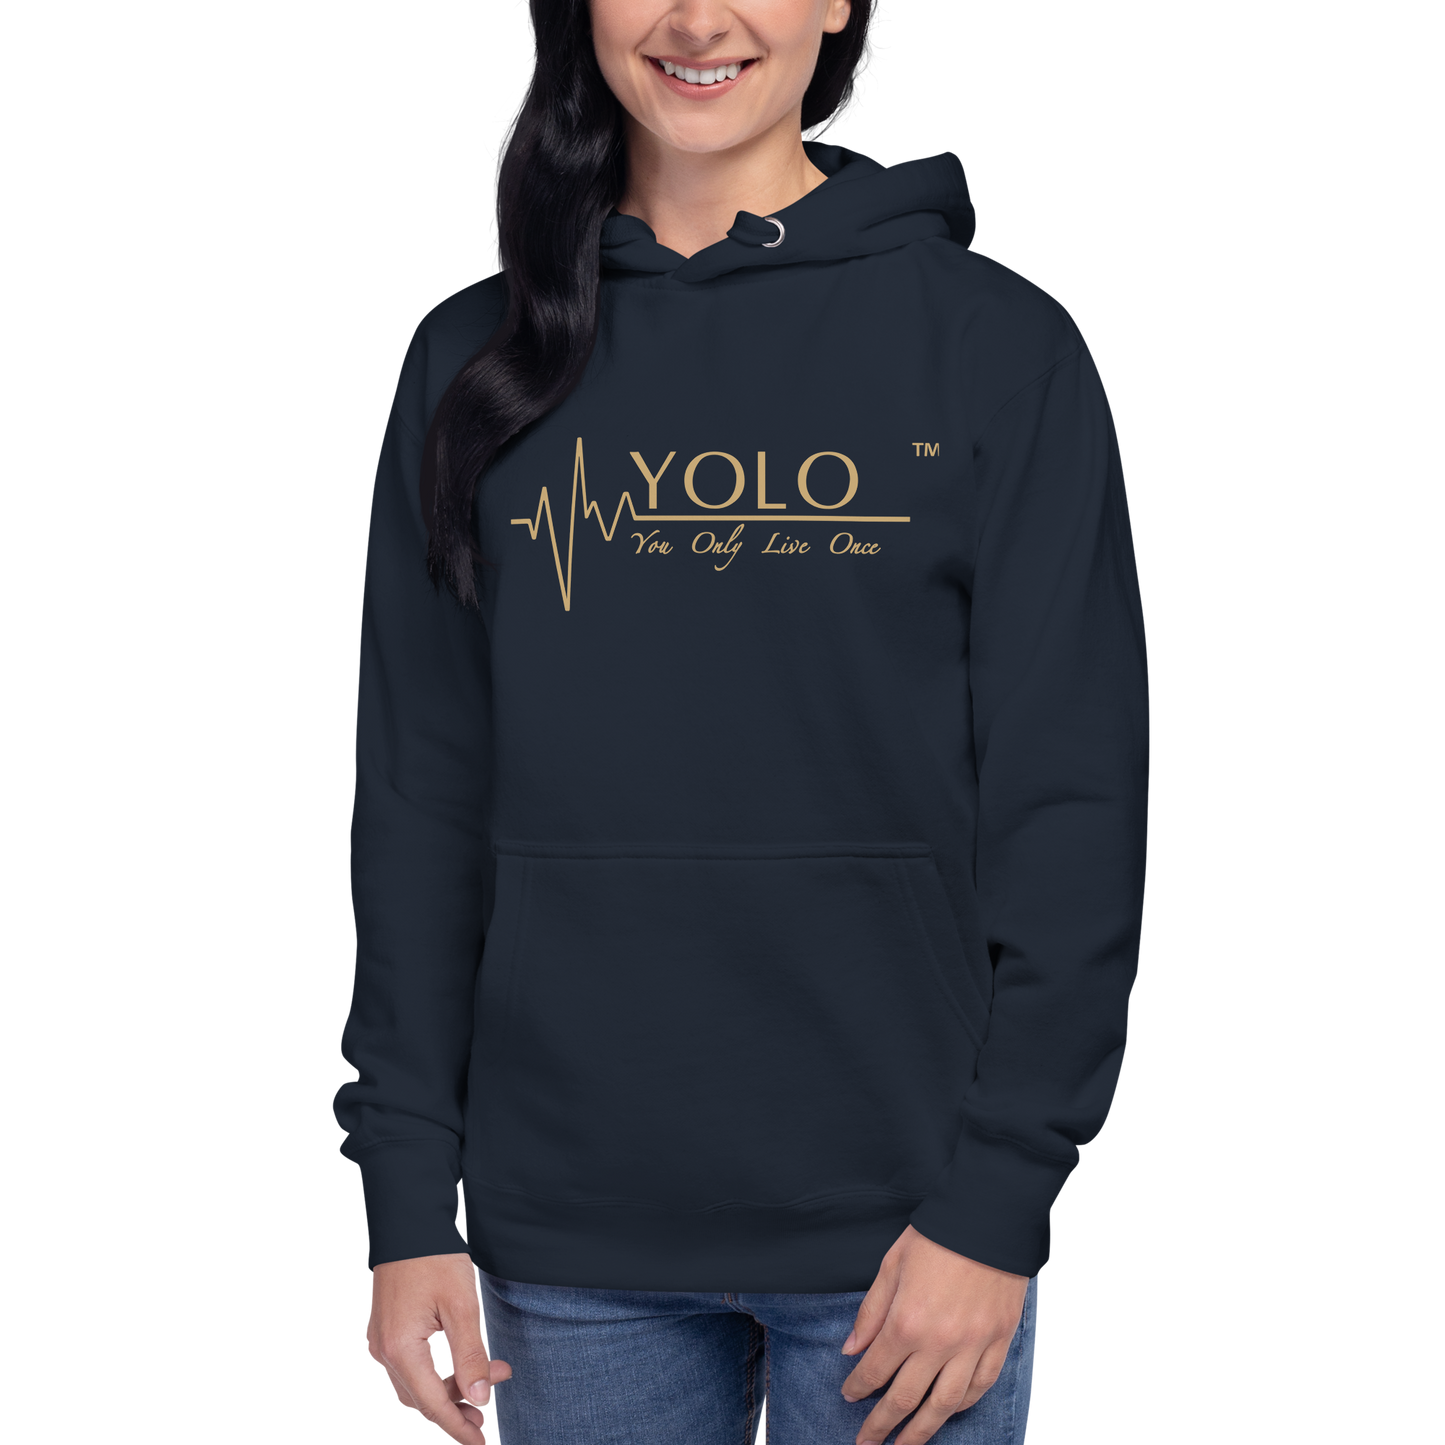 YOLO Hoodie Embroider Logo - NAVY BLUE